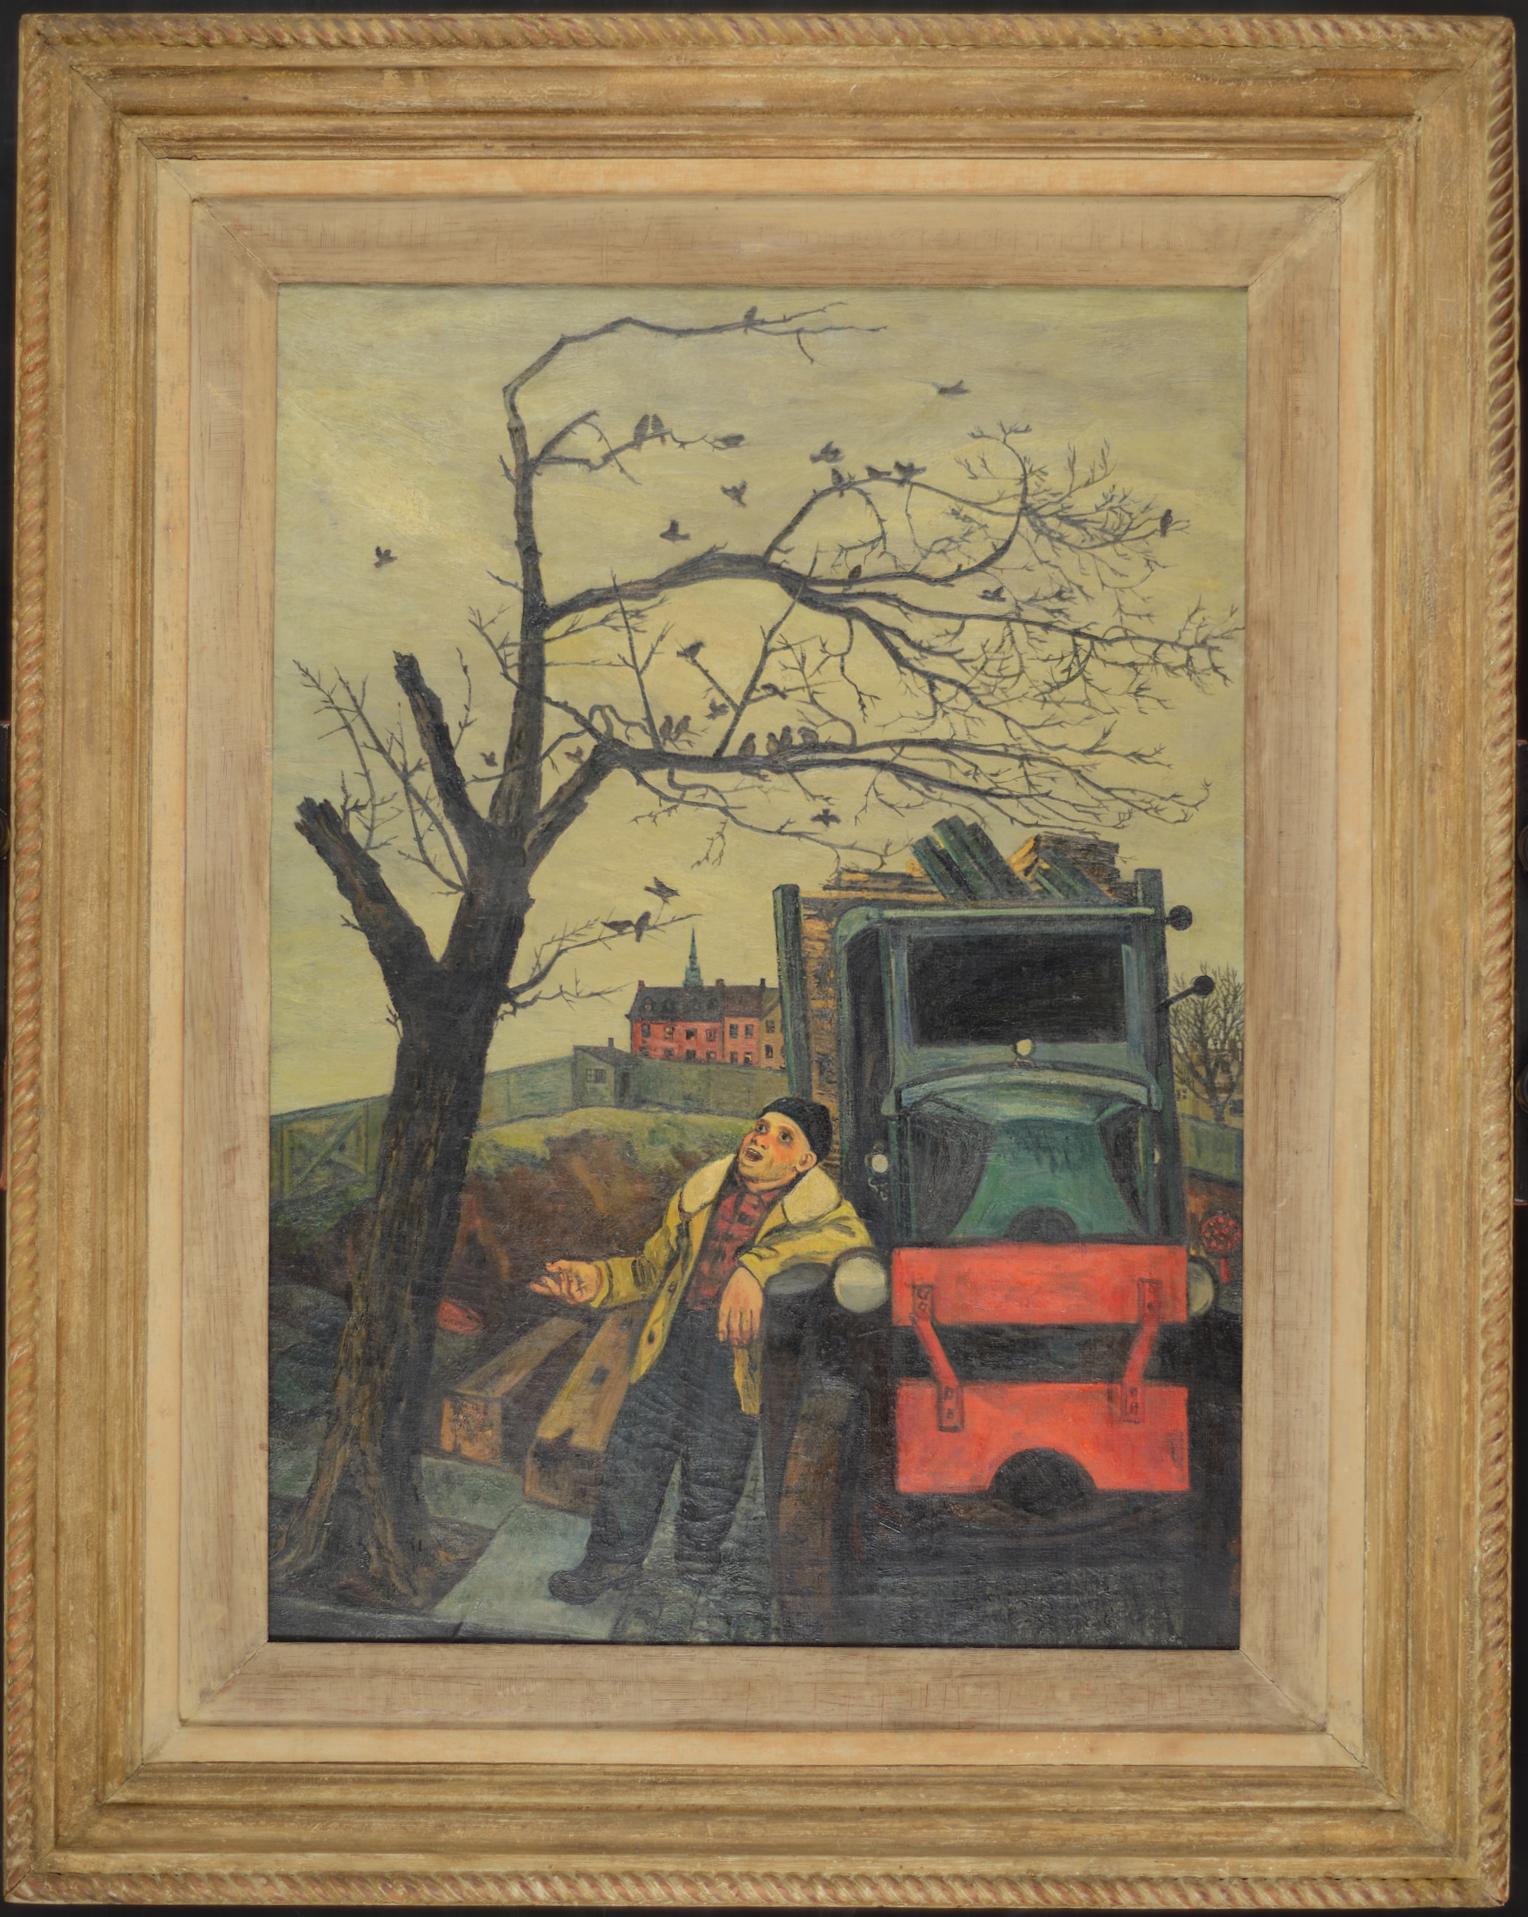 This work epitomizes Prestopino's interest in social realism which captures a quiet interlude in the everyday life of an "everyman." It also provides a contrast for our expectations as we view a tough, blue collar worker, with no one watching, as he